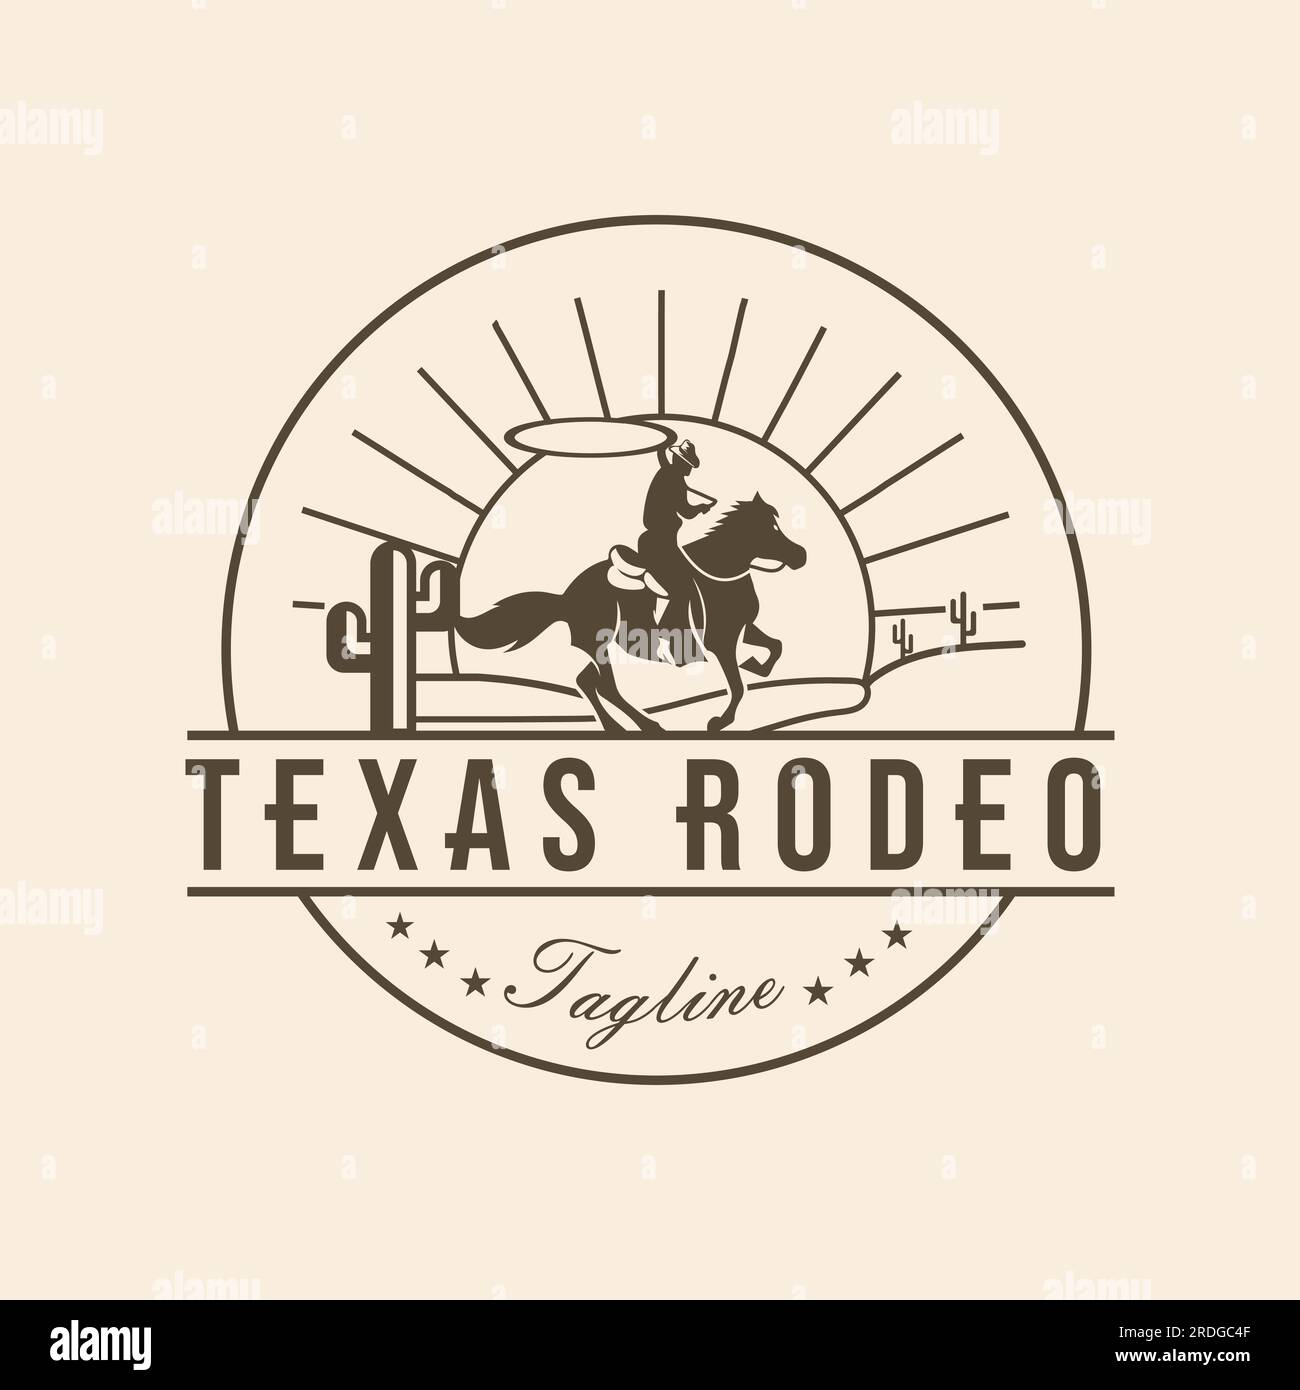 Cowboy horse silhouette rodeo texas Vintage Retro Western Country Stamp Emblem Logo design template Stock Vector